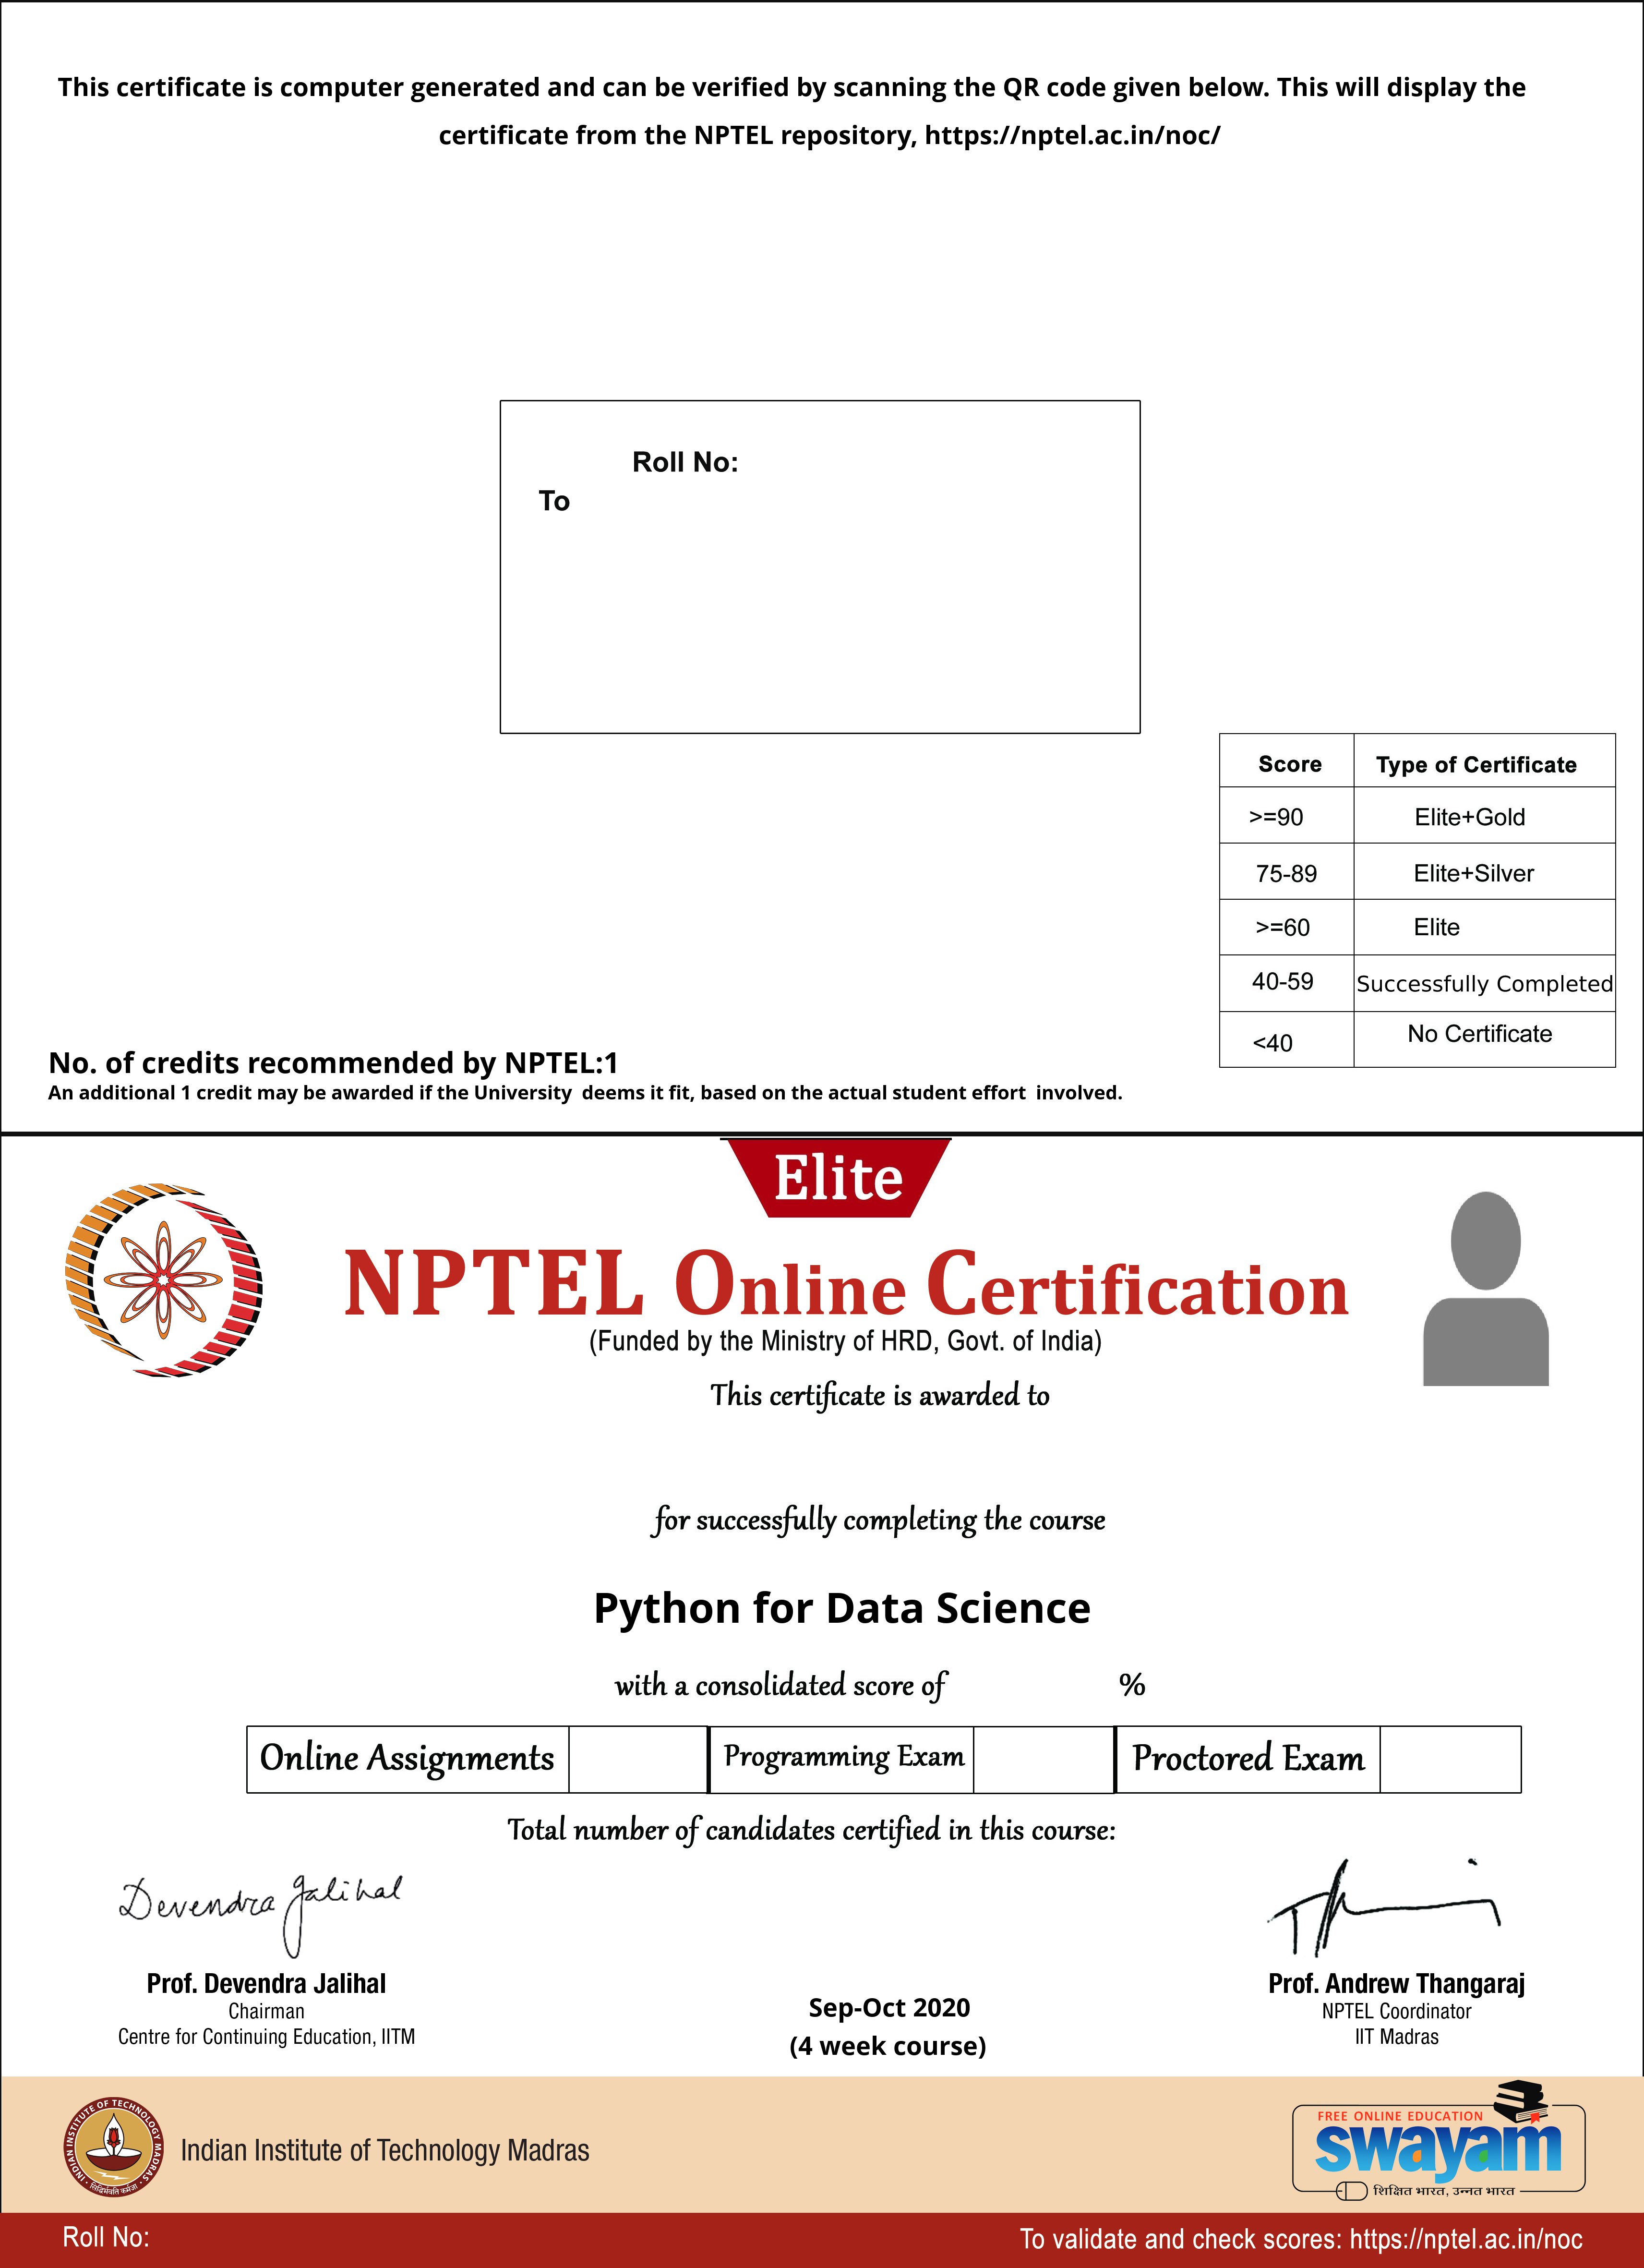 python for data science nptel assignment 4 solutions